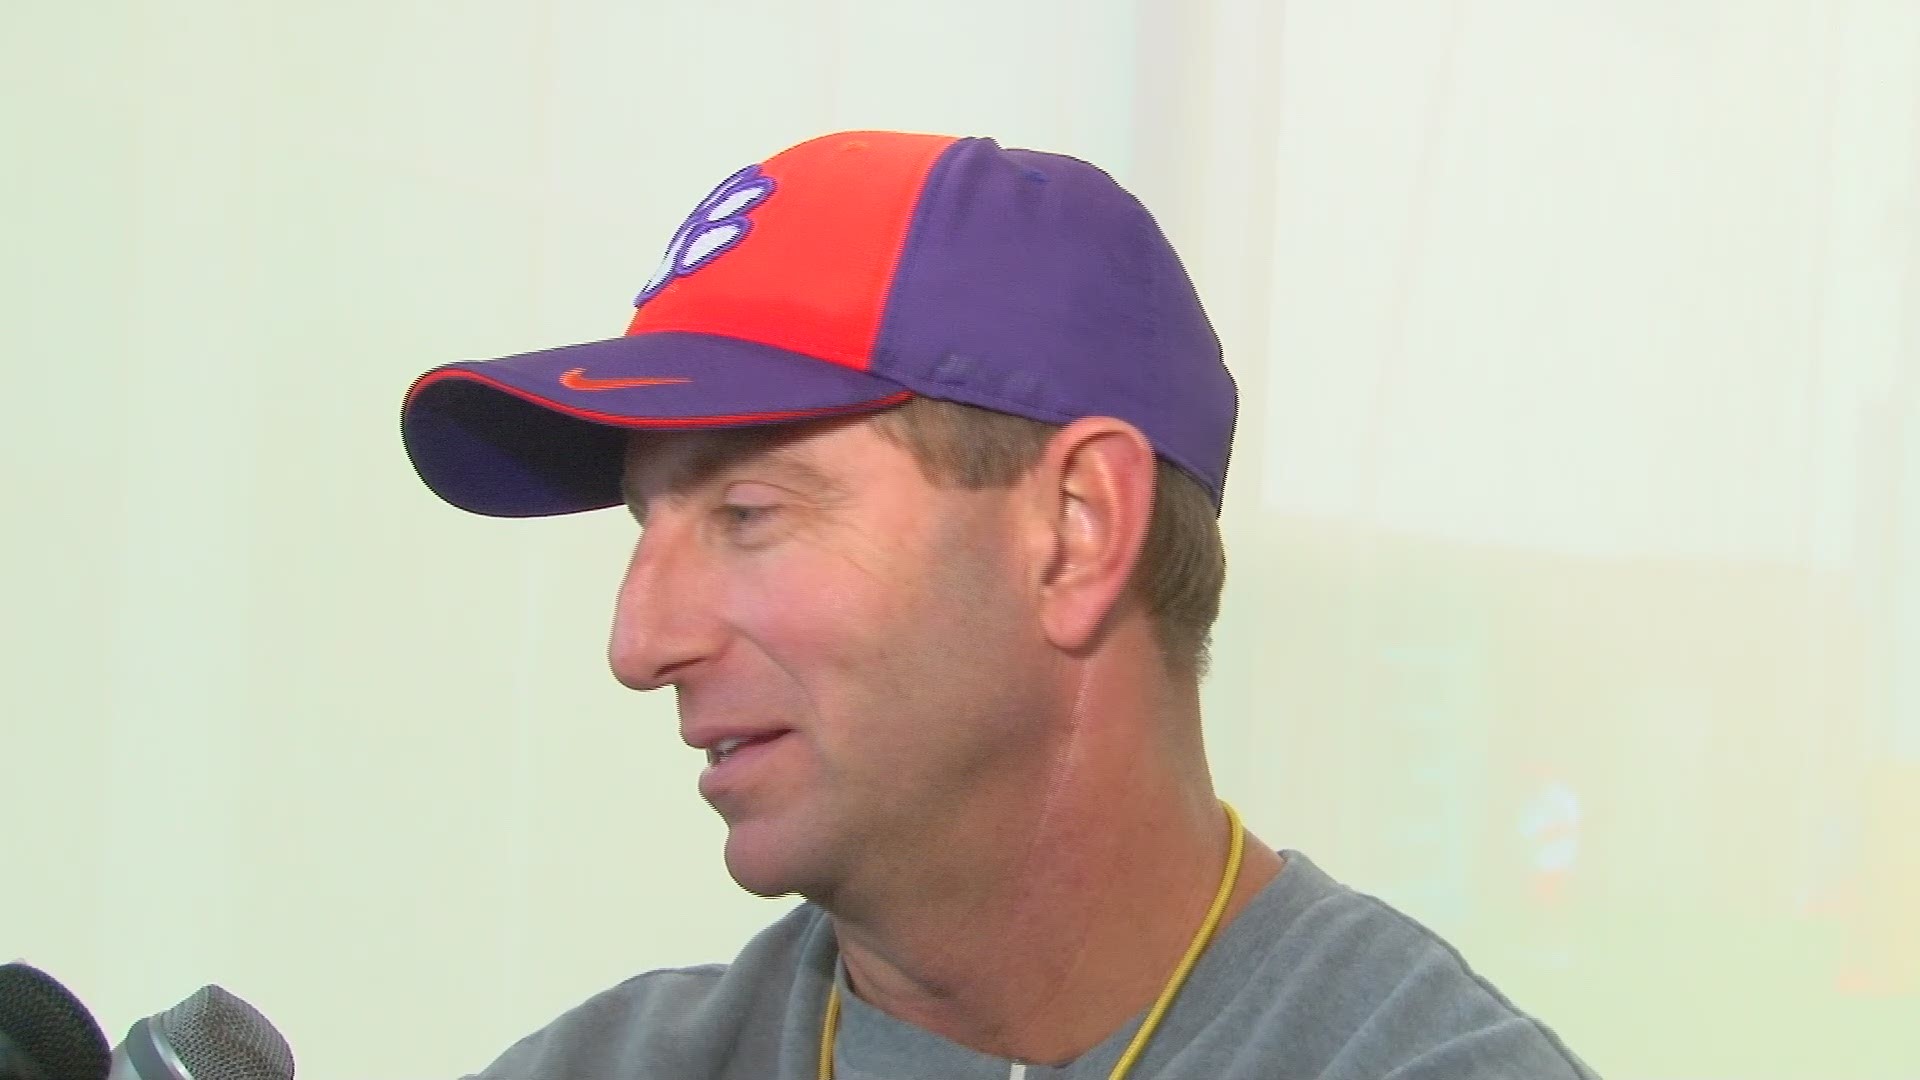 Clemson has been practicing for the college football playoff that last few years and are used to what their schedule can be like. Dabo Swinney talks about the advantage of being in this position the last few seasons and what the Tigers are doing and need